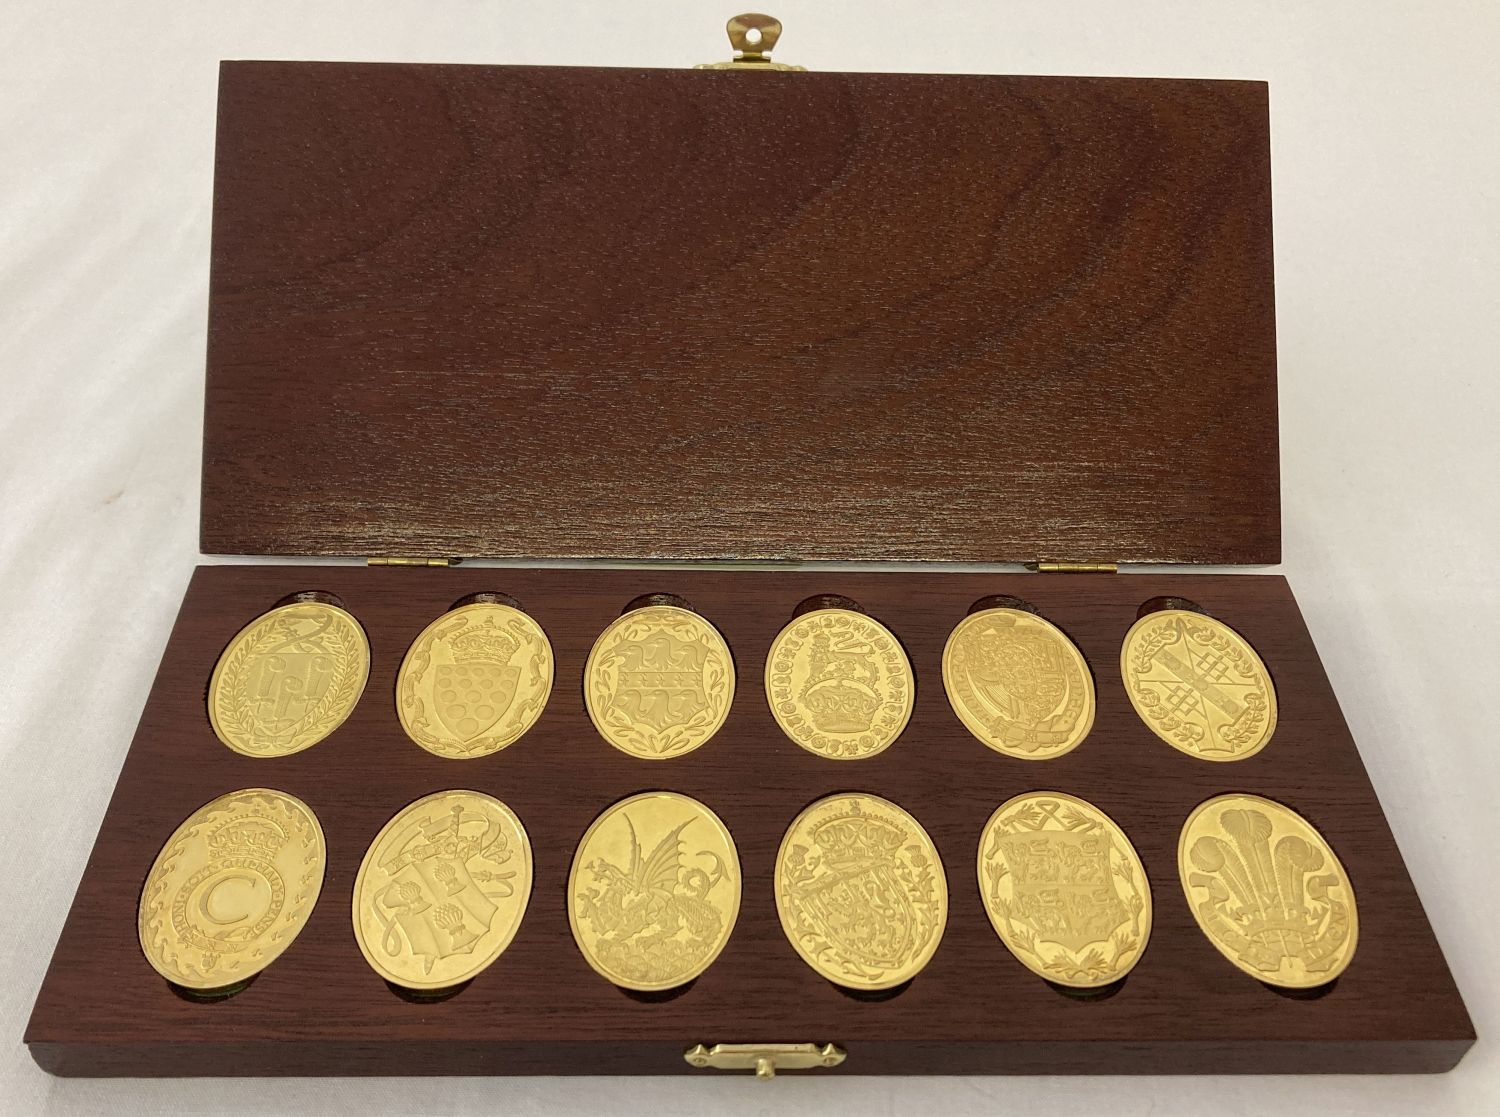 A collection of 12 "The Arms Of The Prince And Princess Of Wales" gold plated silver ingots.